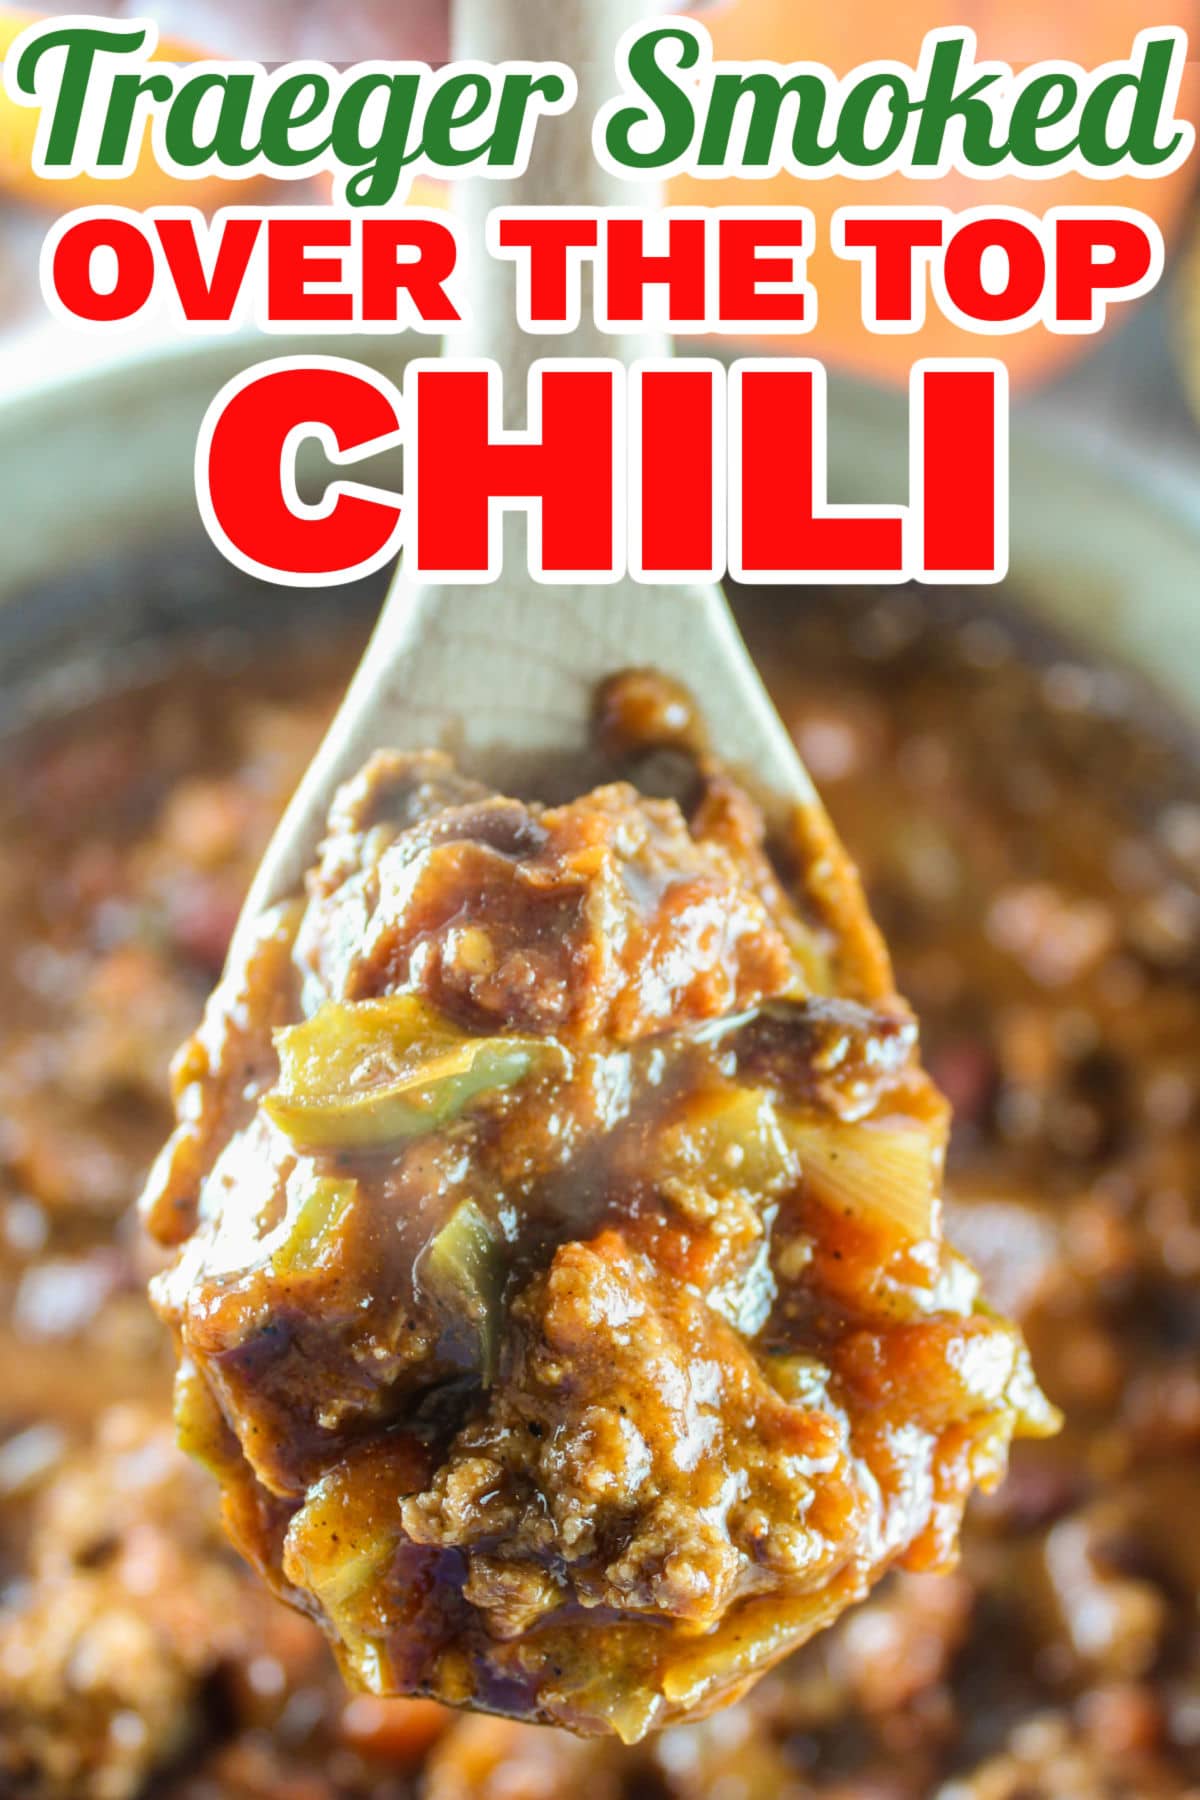 This Traeger Over The Top Chili is hands down the best chili I've ever had! The smoked meatball you put above the chili turns out smokey and so juicy! Plus - with the Traeger - it's super simple - you set the temp and that's it! via @foodhussy